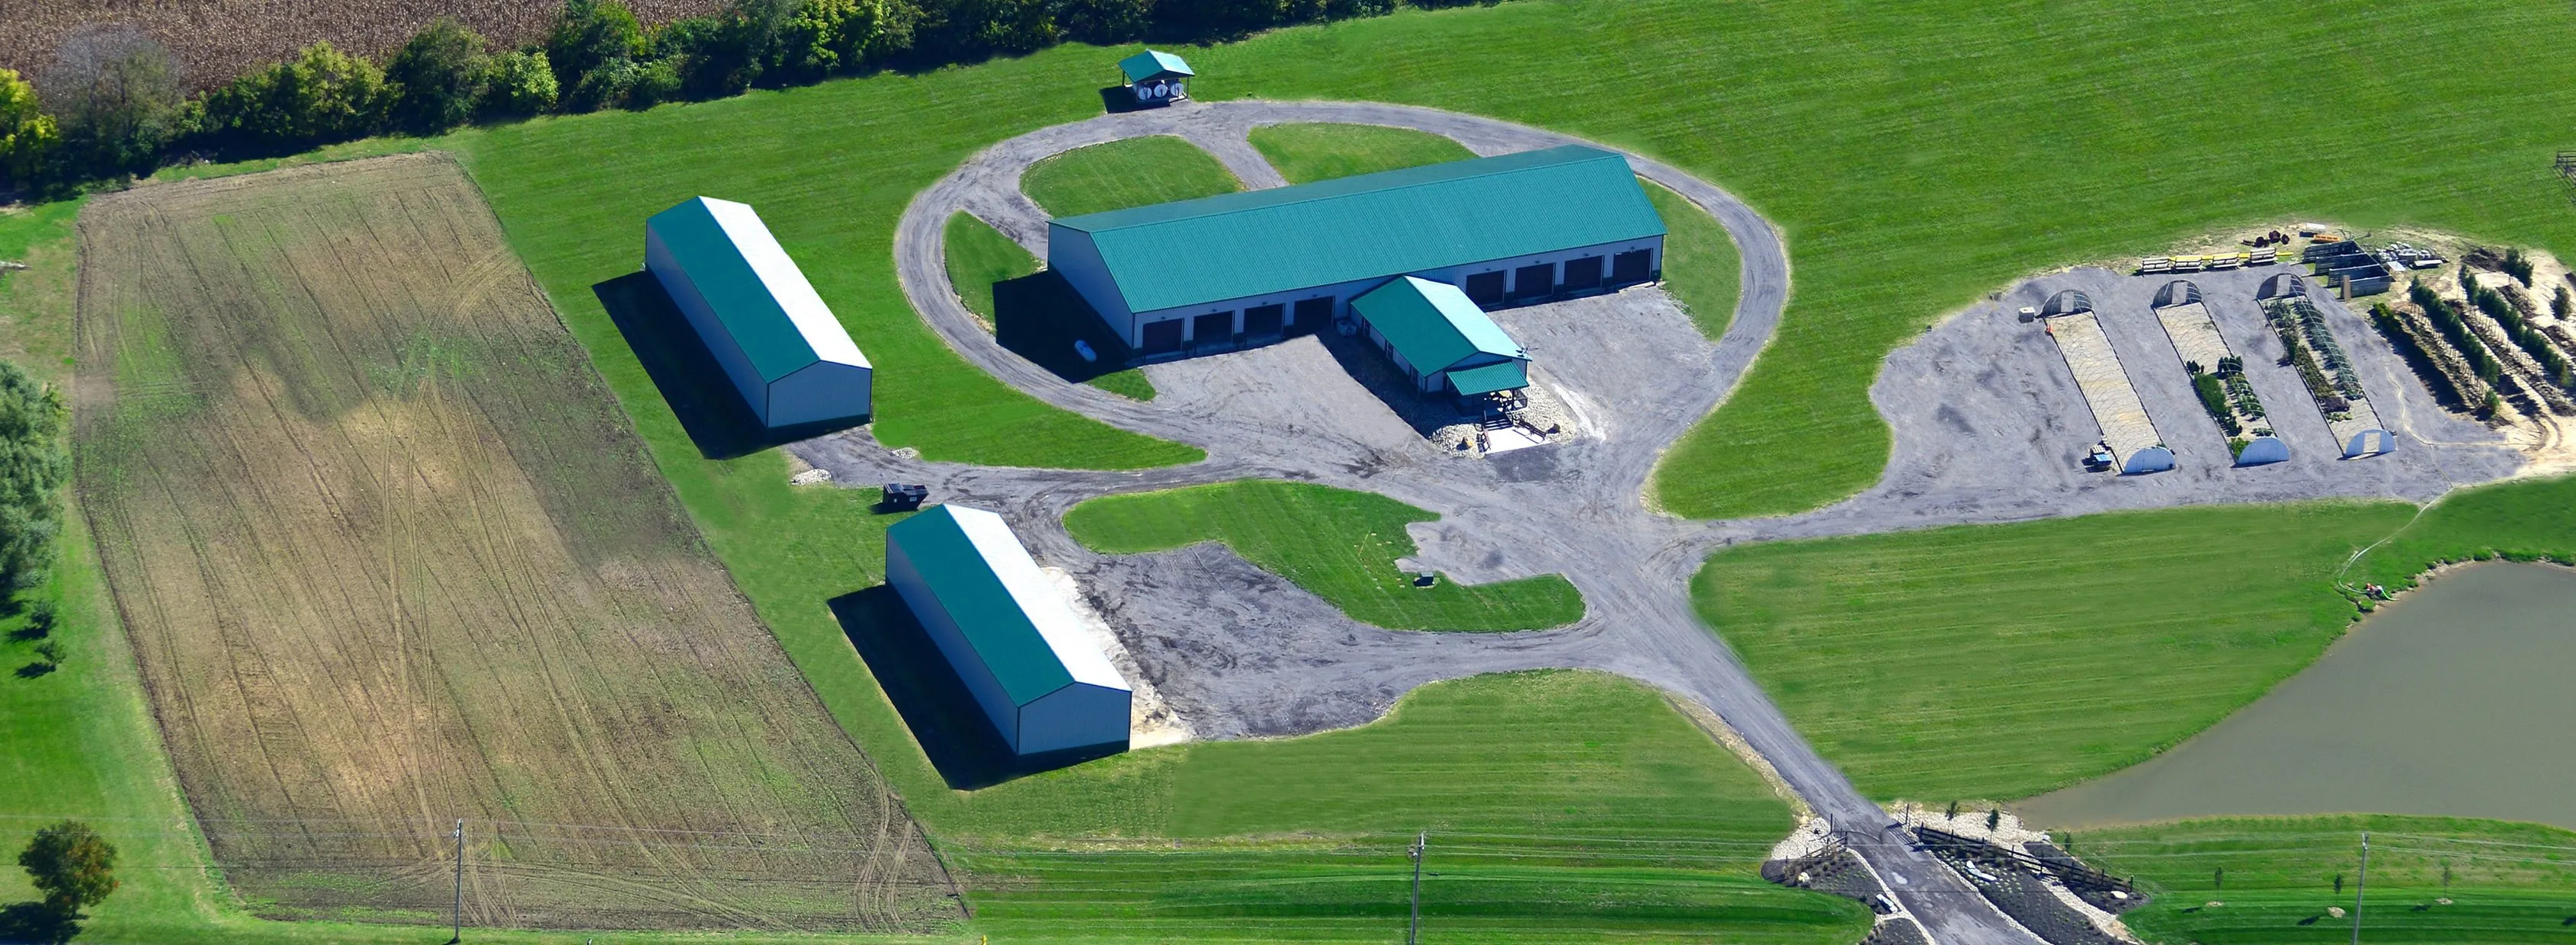 Maintenance Services for Norvell's Turf Management, Inc in Middletown, OH